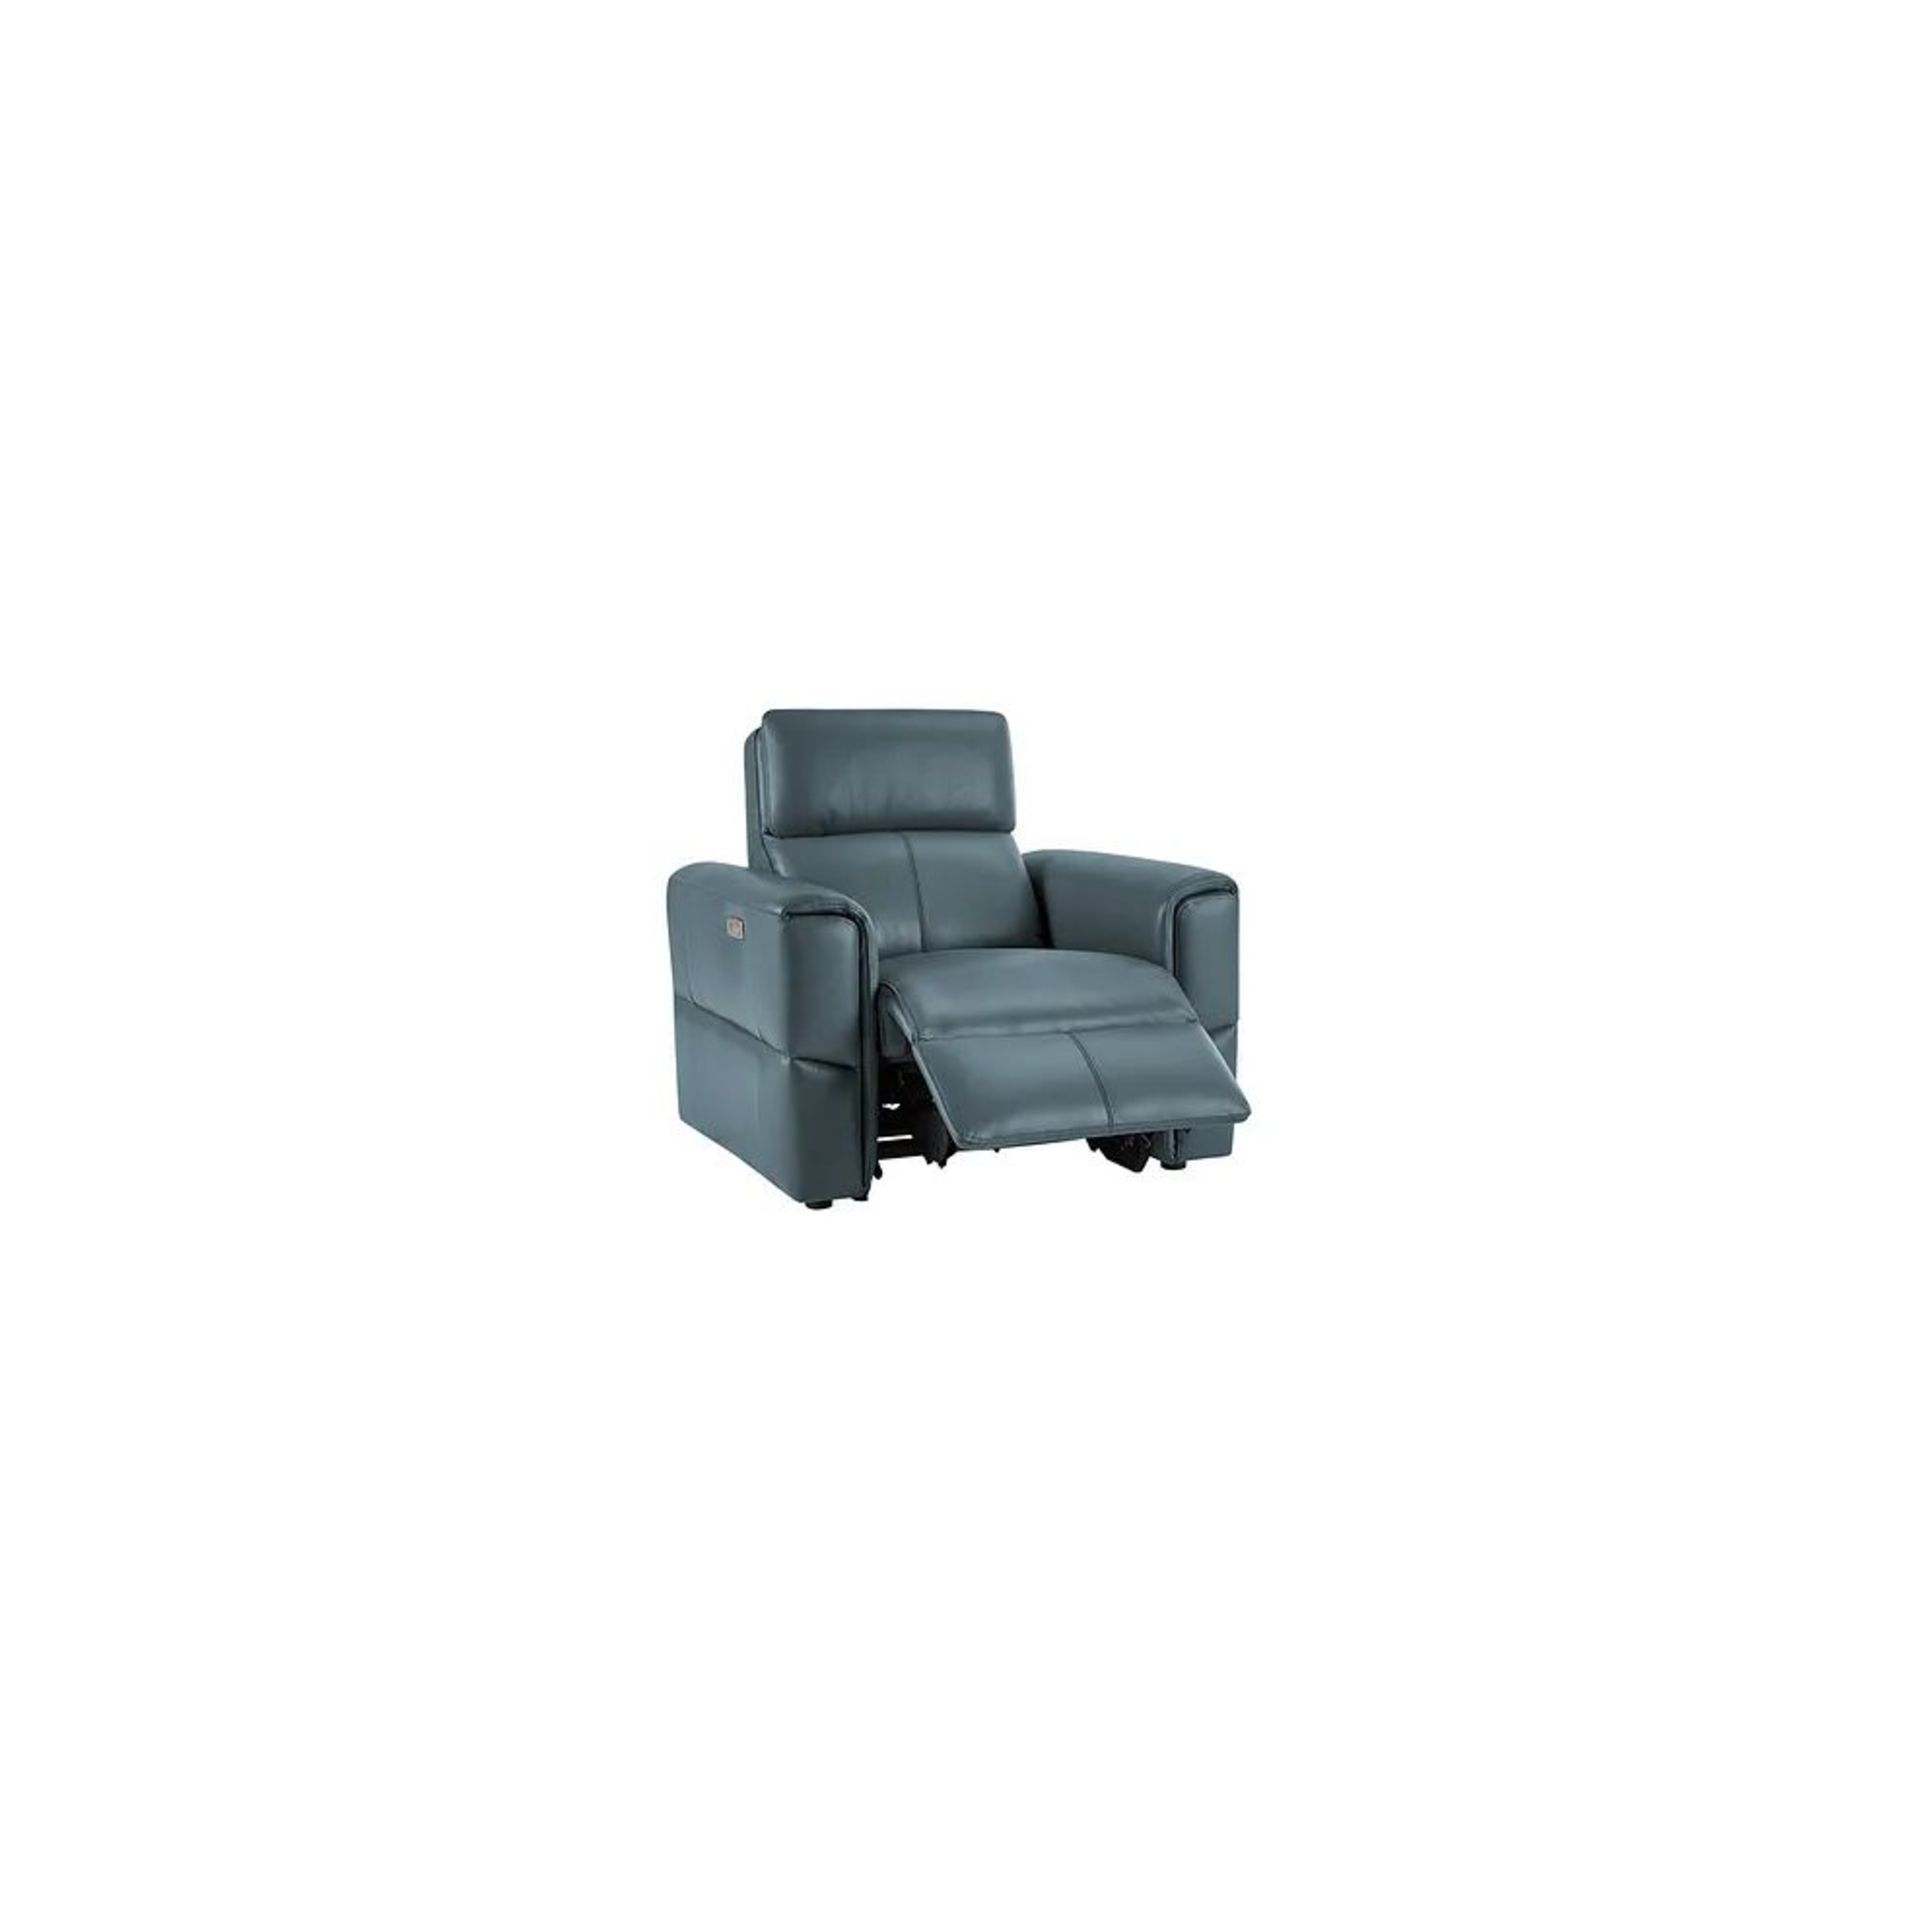 BRAND NEW SAMSON Electric Recliner Armchair - LIGHT BLUE LEATHER. RRP £1249. Showcasing neat, modern - Image 3 of 10